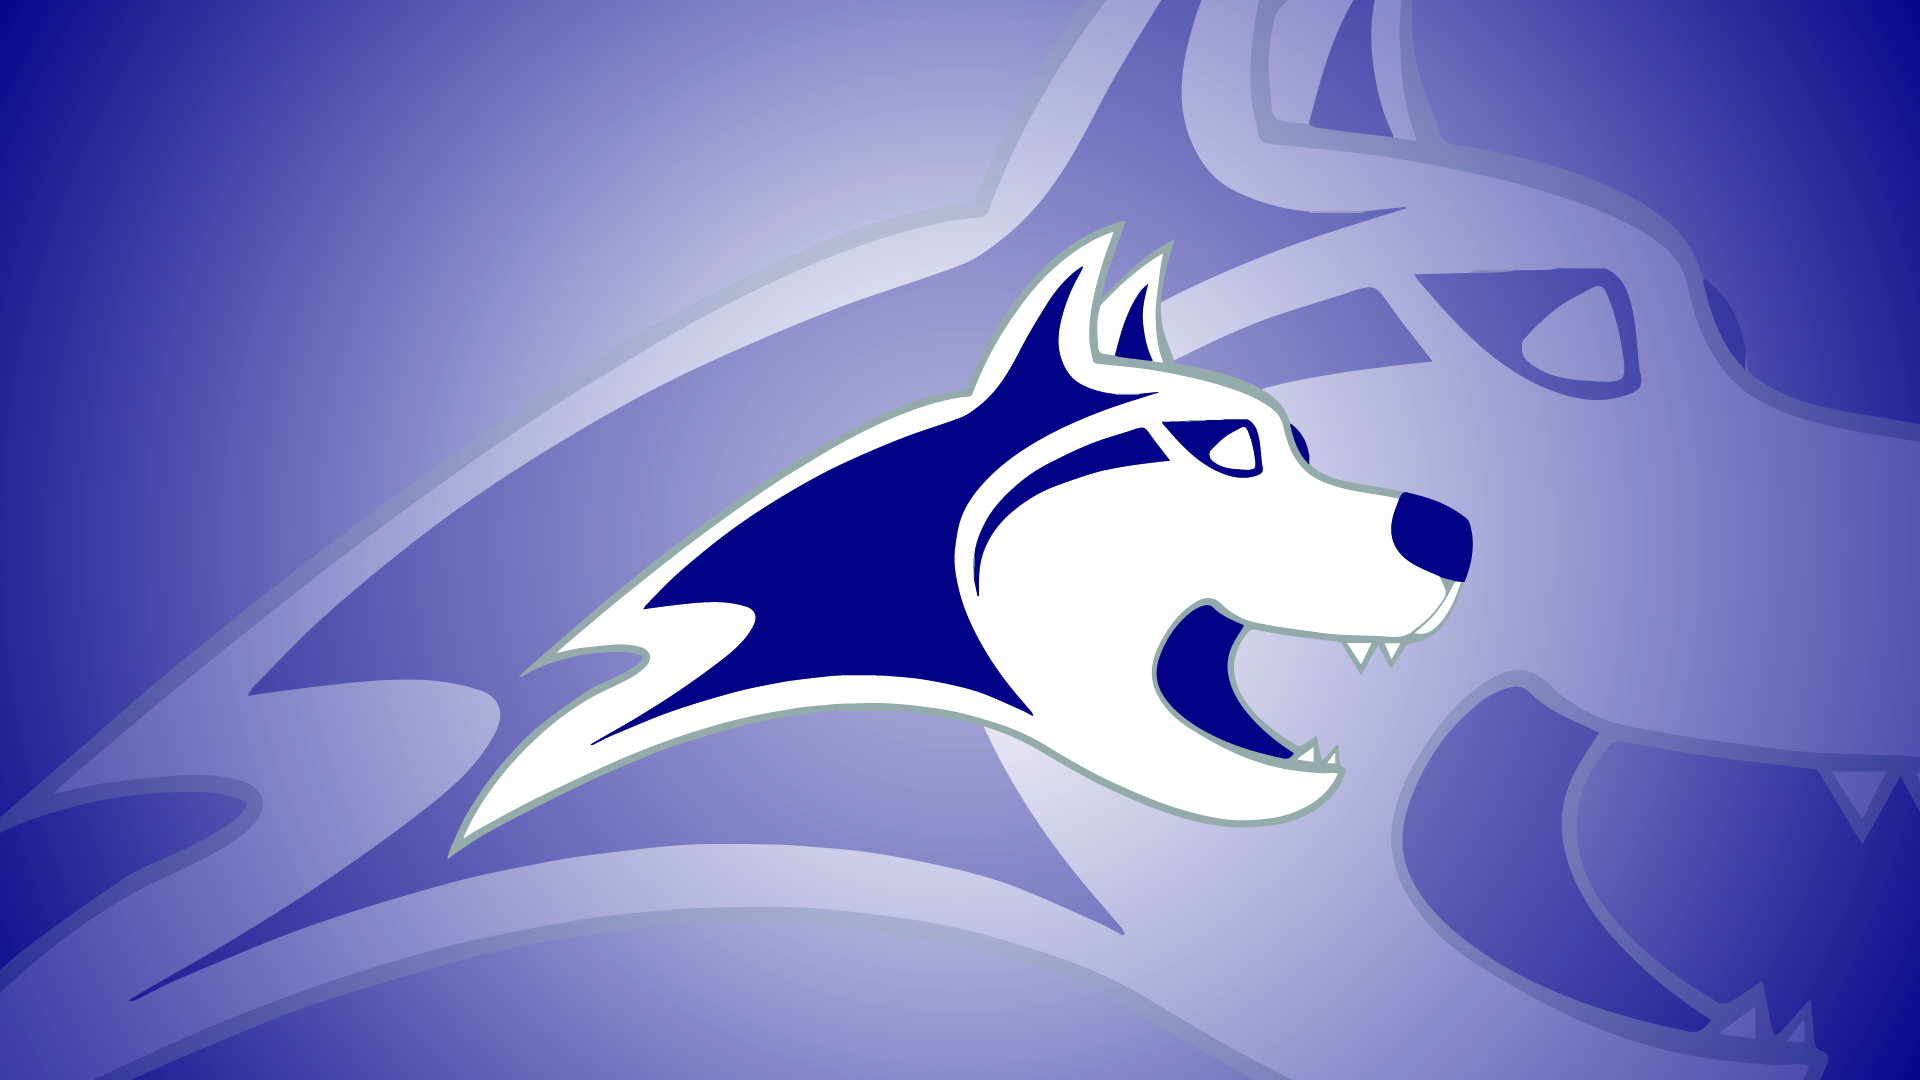 Little wolves logo two times in the middle of a white to purple radial gradient. 